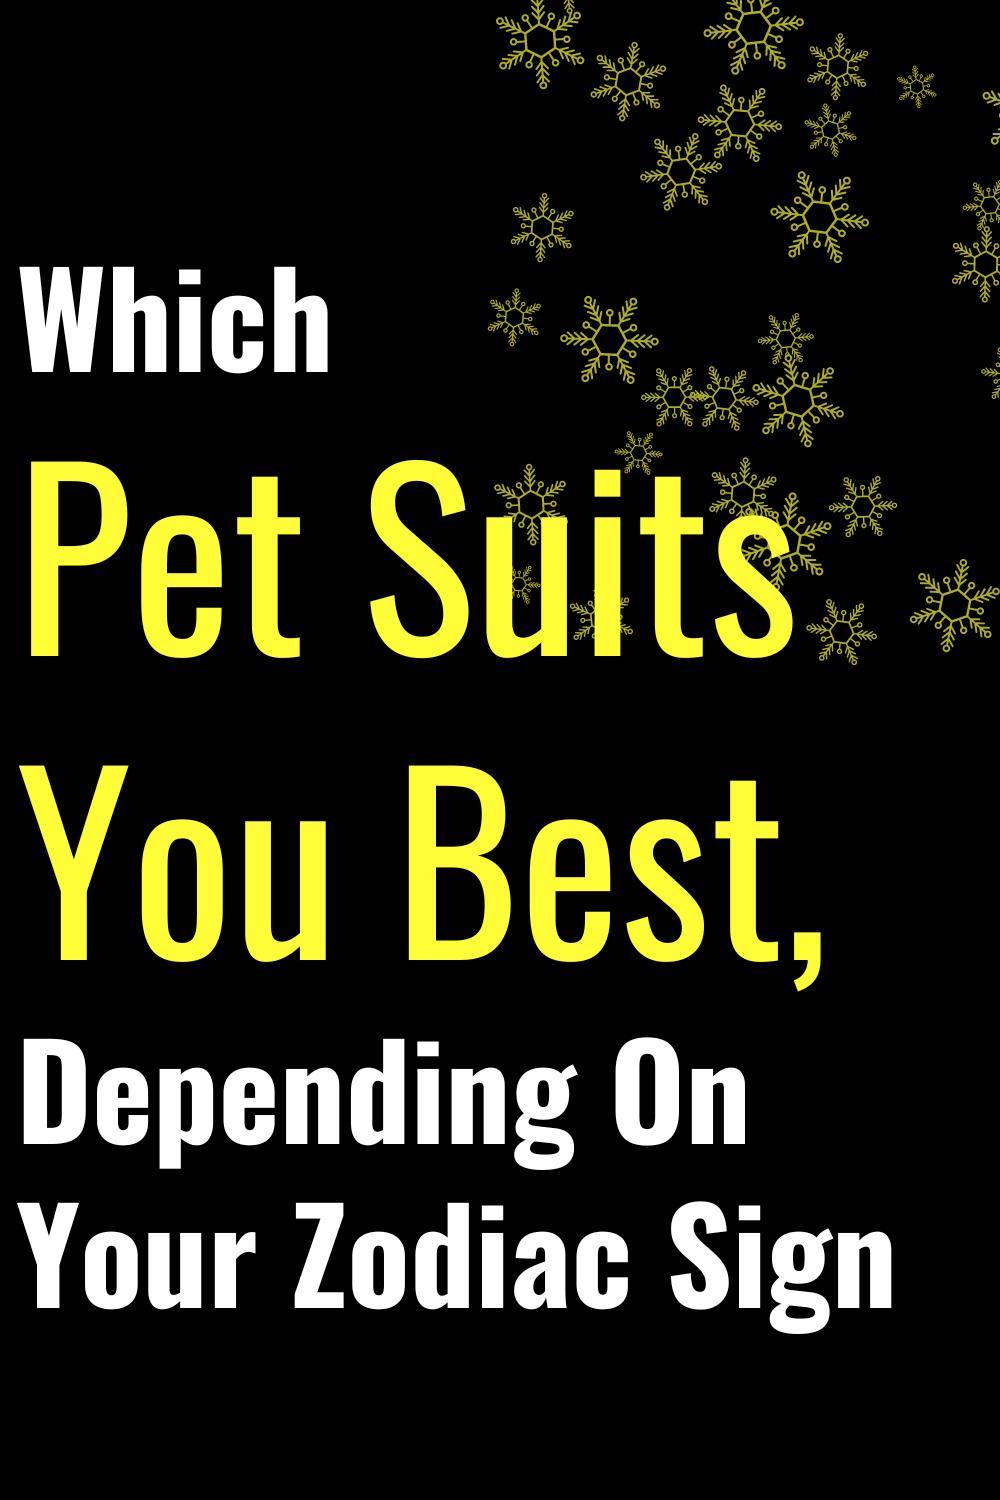 Which Pet Suits You Best, Depending On Your Zodiac Sign